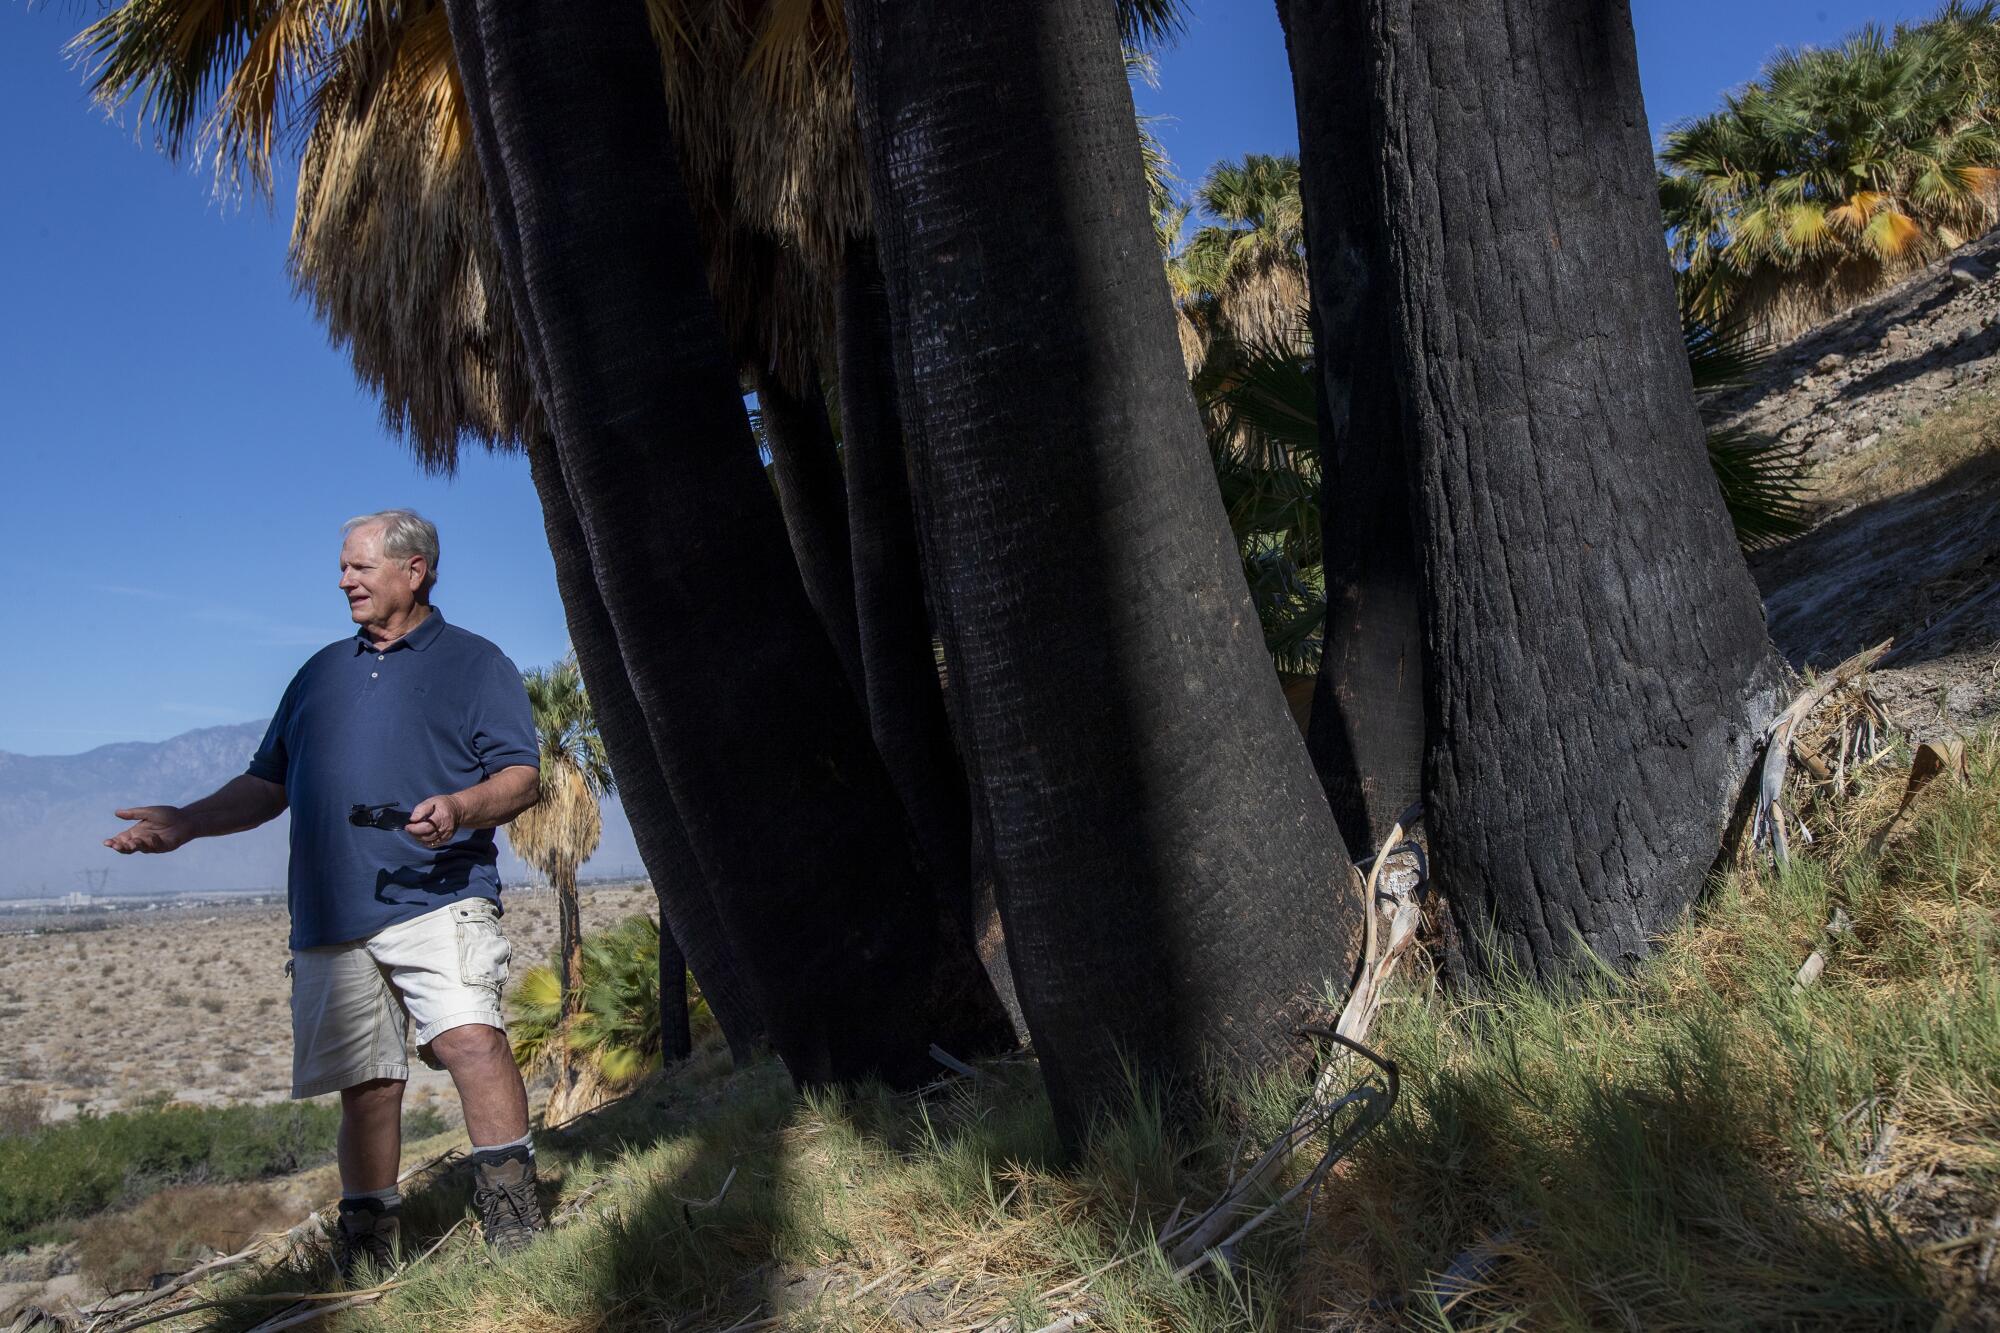 A man stands next to a grove of fan palm trees.